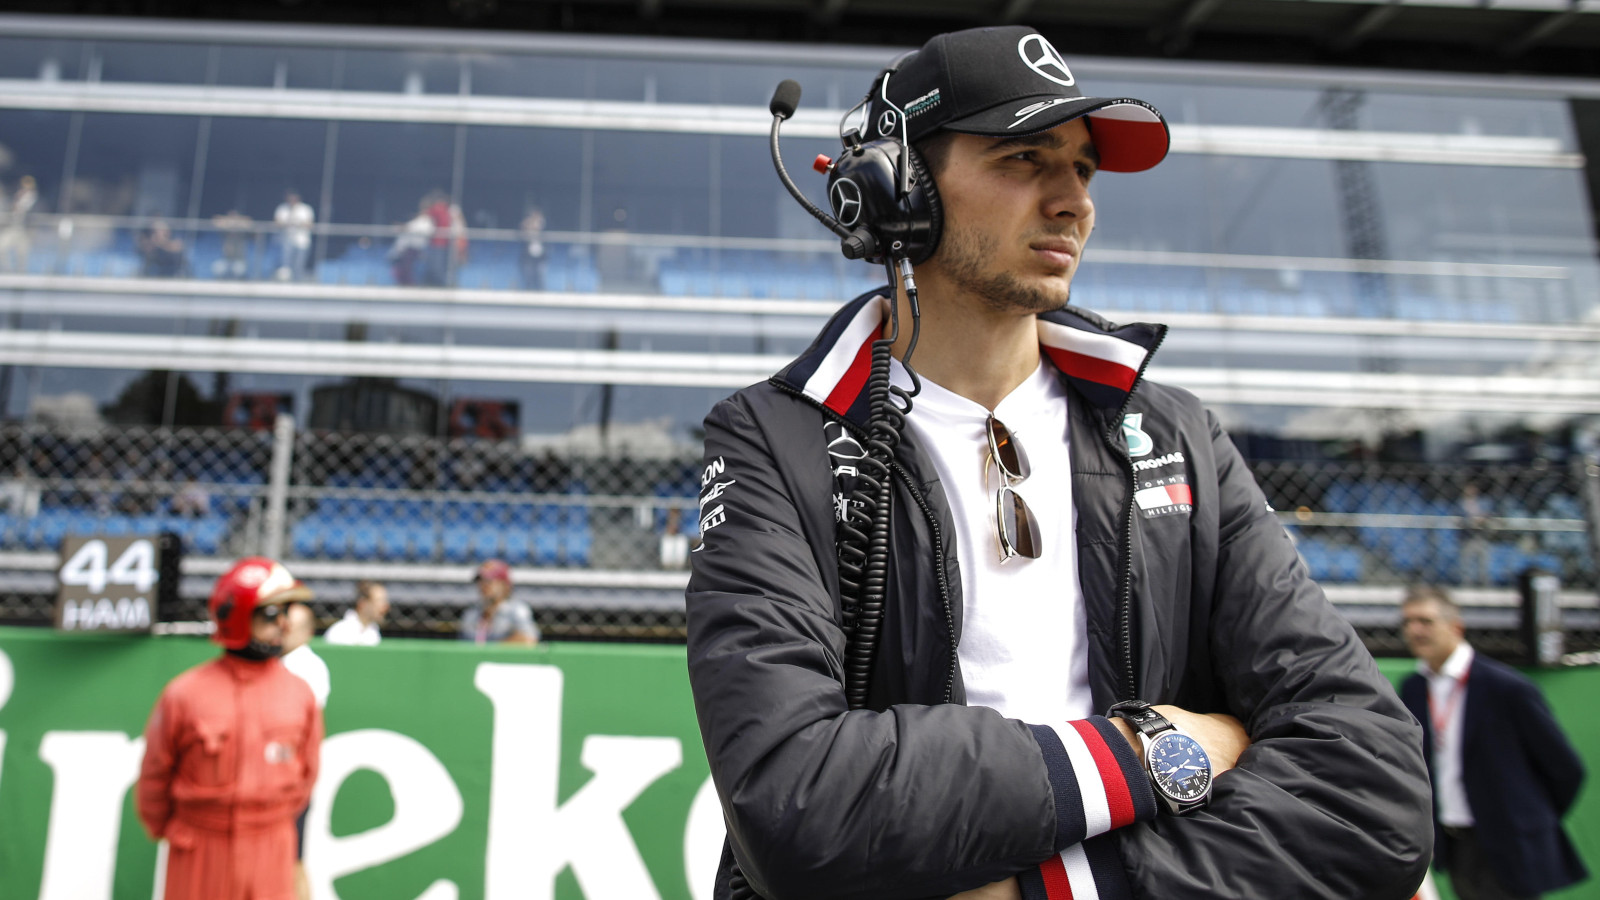 Esteban Ocon watches on while standing on the grid as Mercedes reserve driver at the 2019 Italian Grand Prix. Monza, September 2019